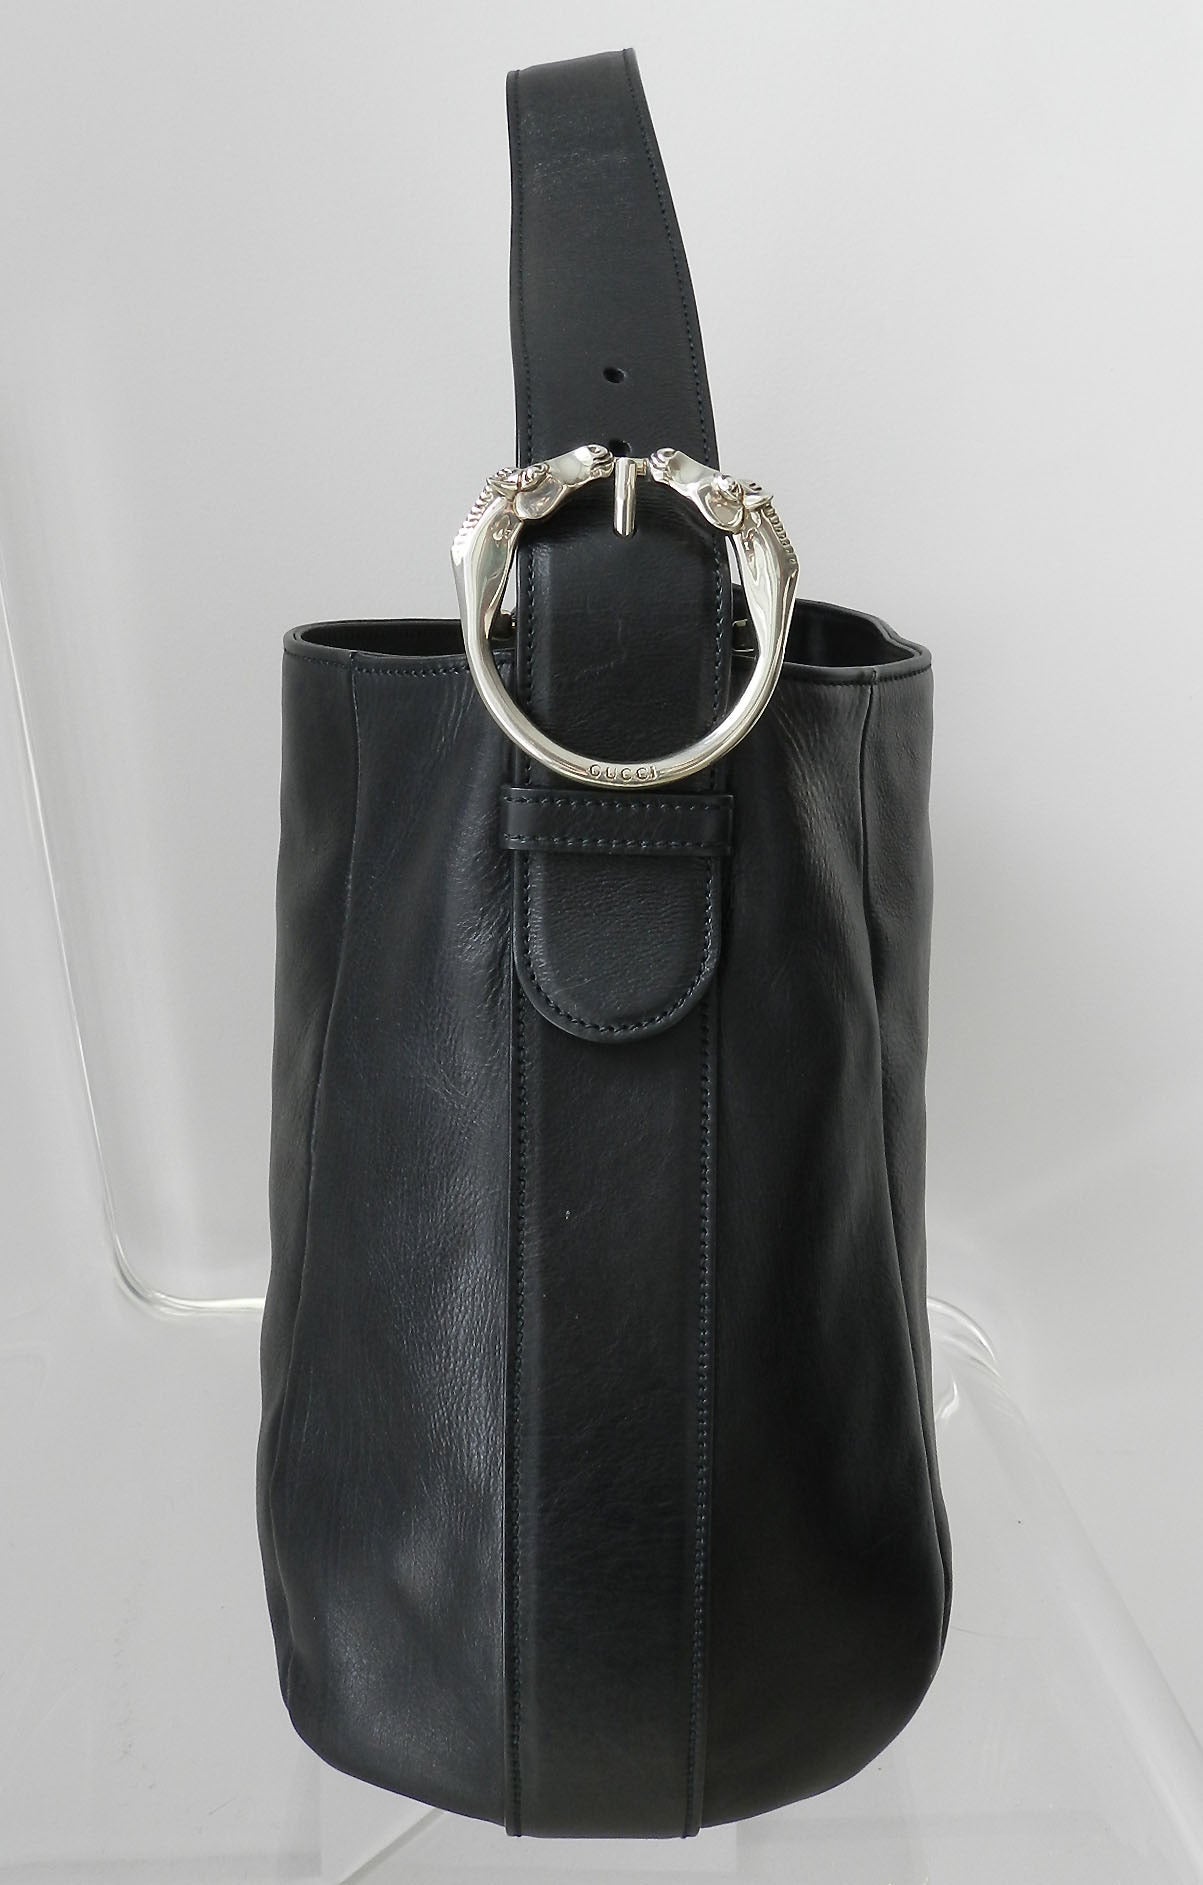 Gucci Ribot horse head buckle black leather hobo bag. Excellent previously owned condition with clean interior and exterior. Body measures about 16 x 14 x 7